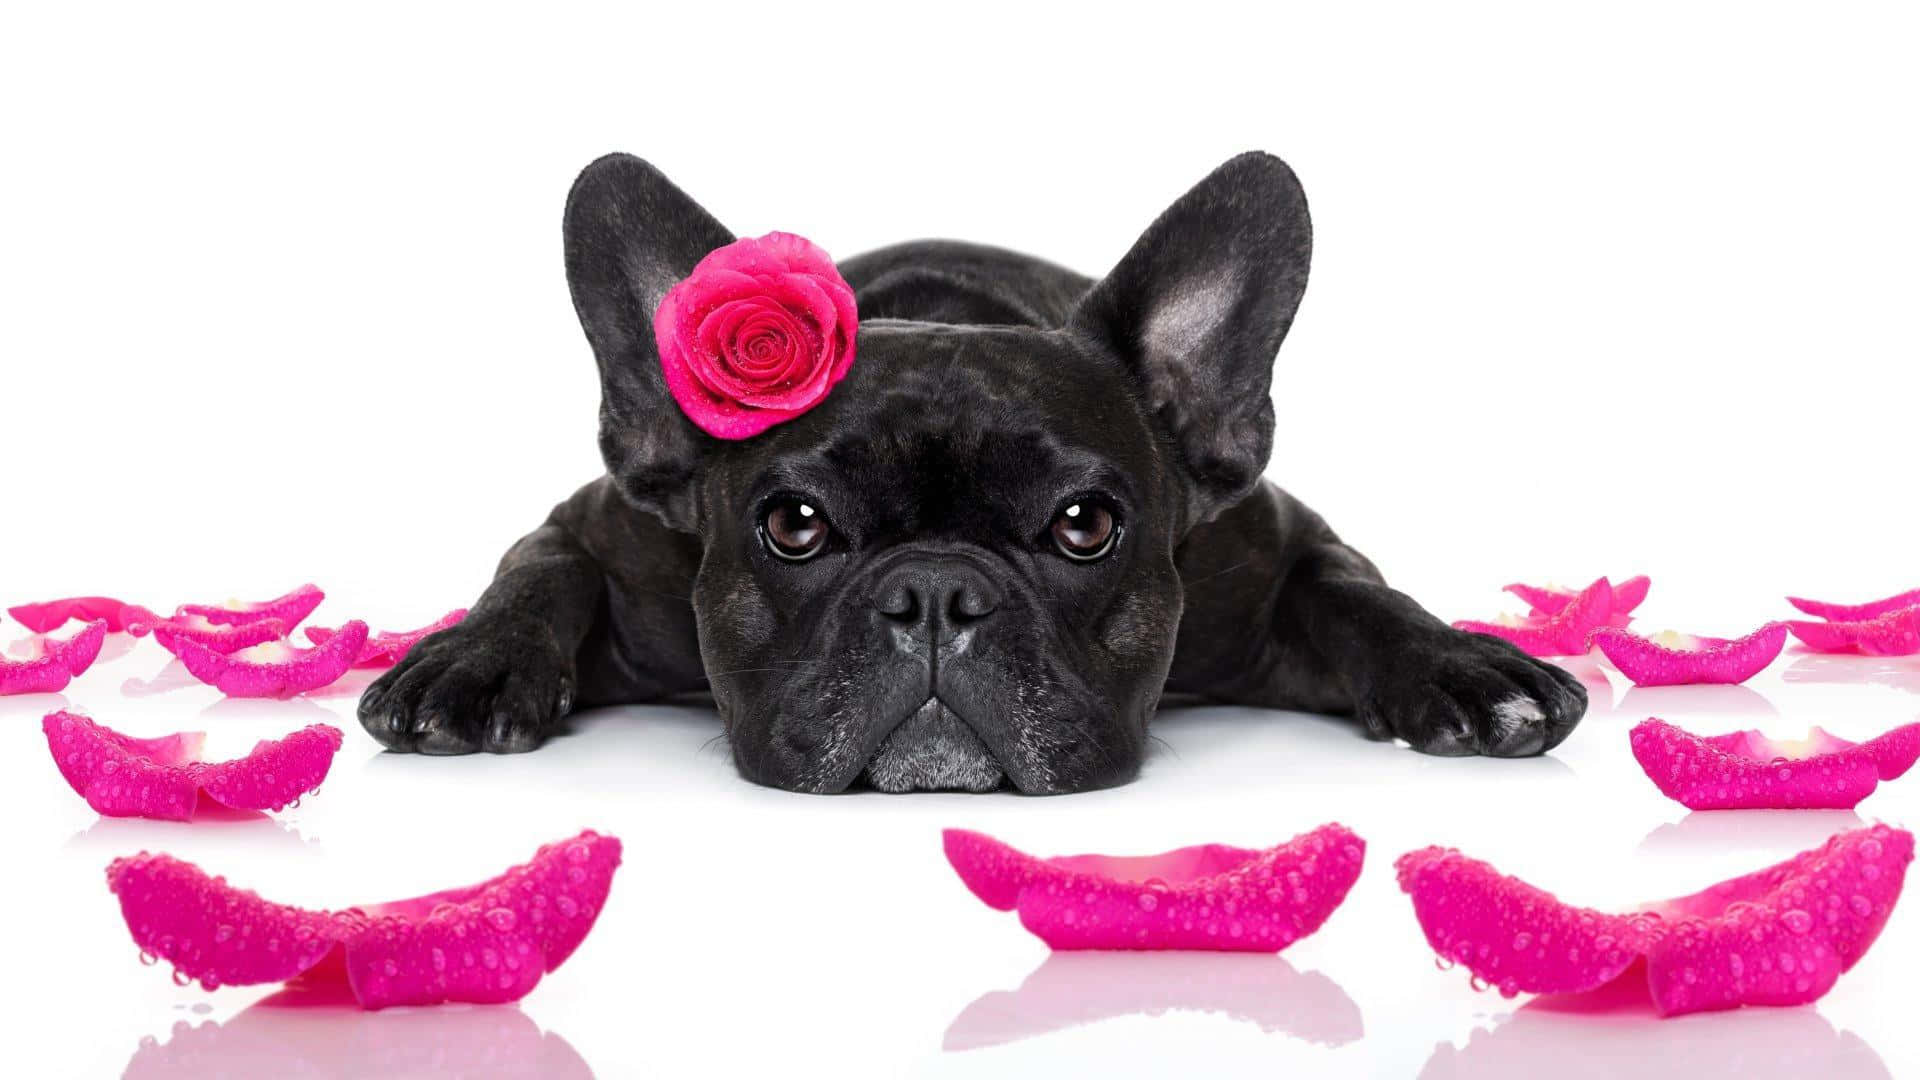 A Black French Bulldog With A Pink Flower On Its Head